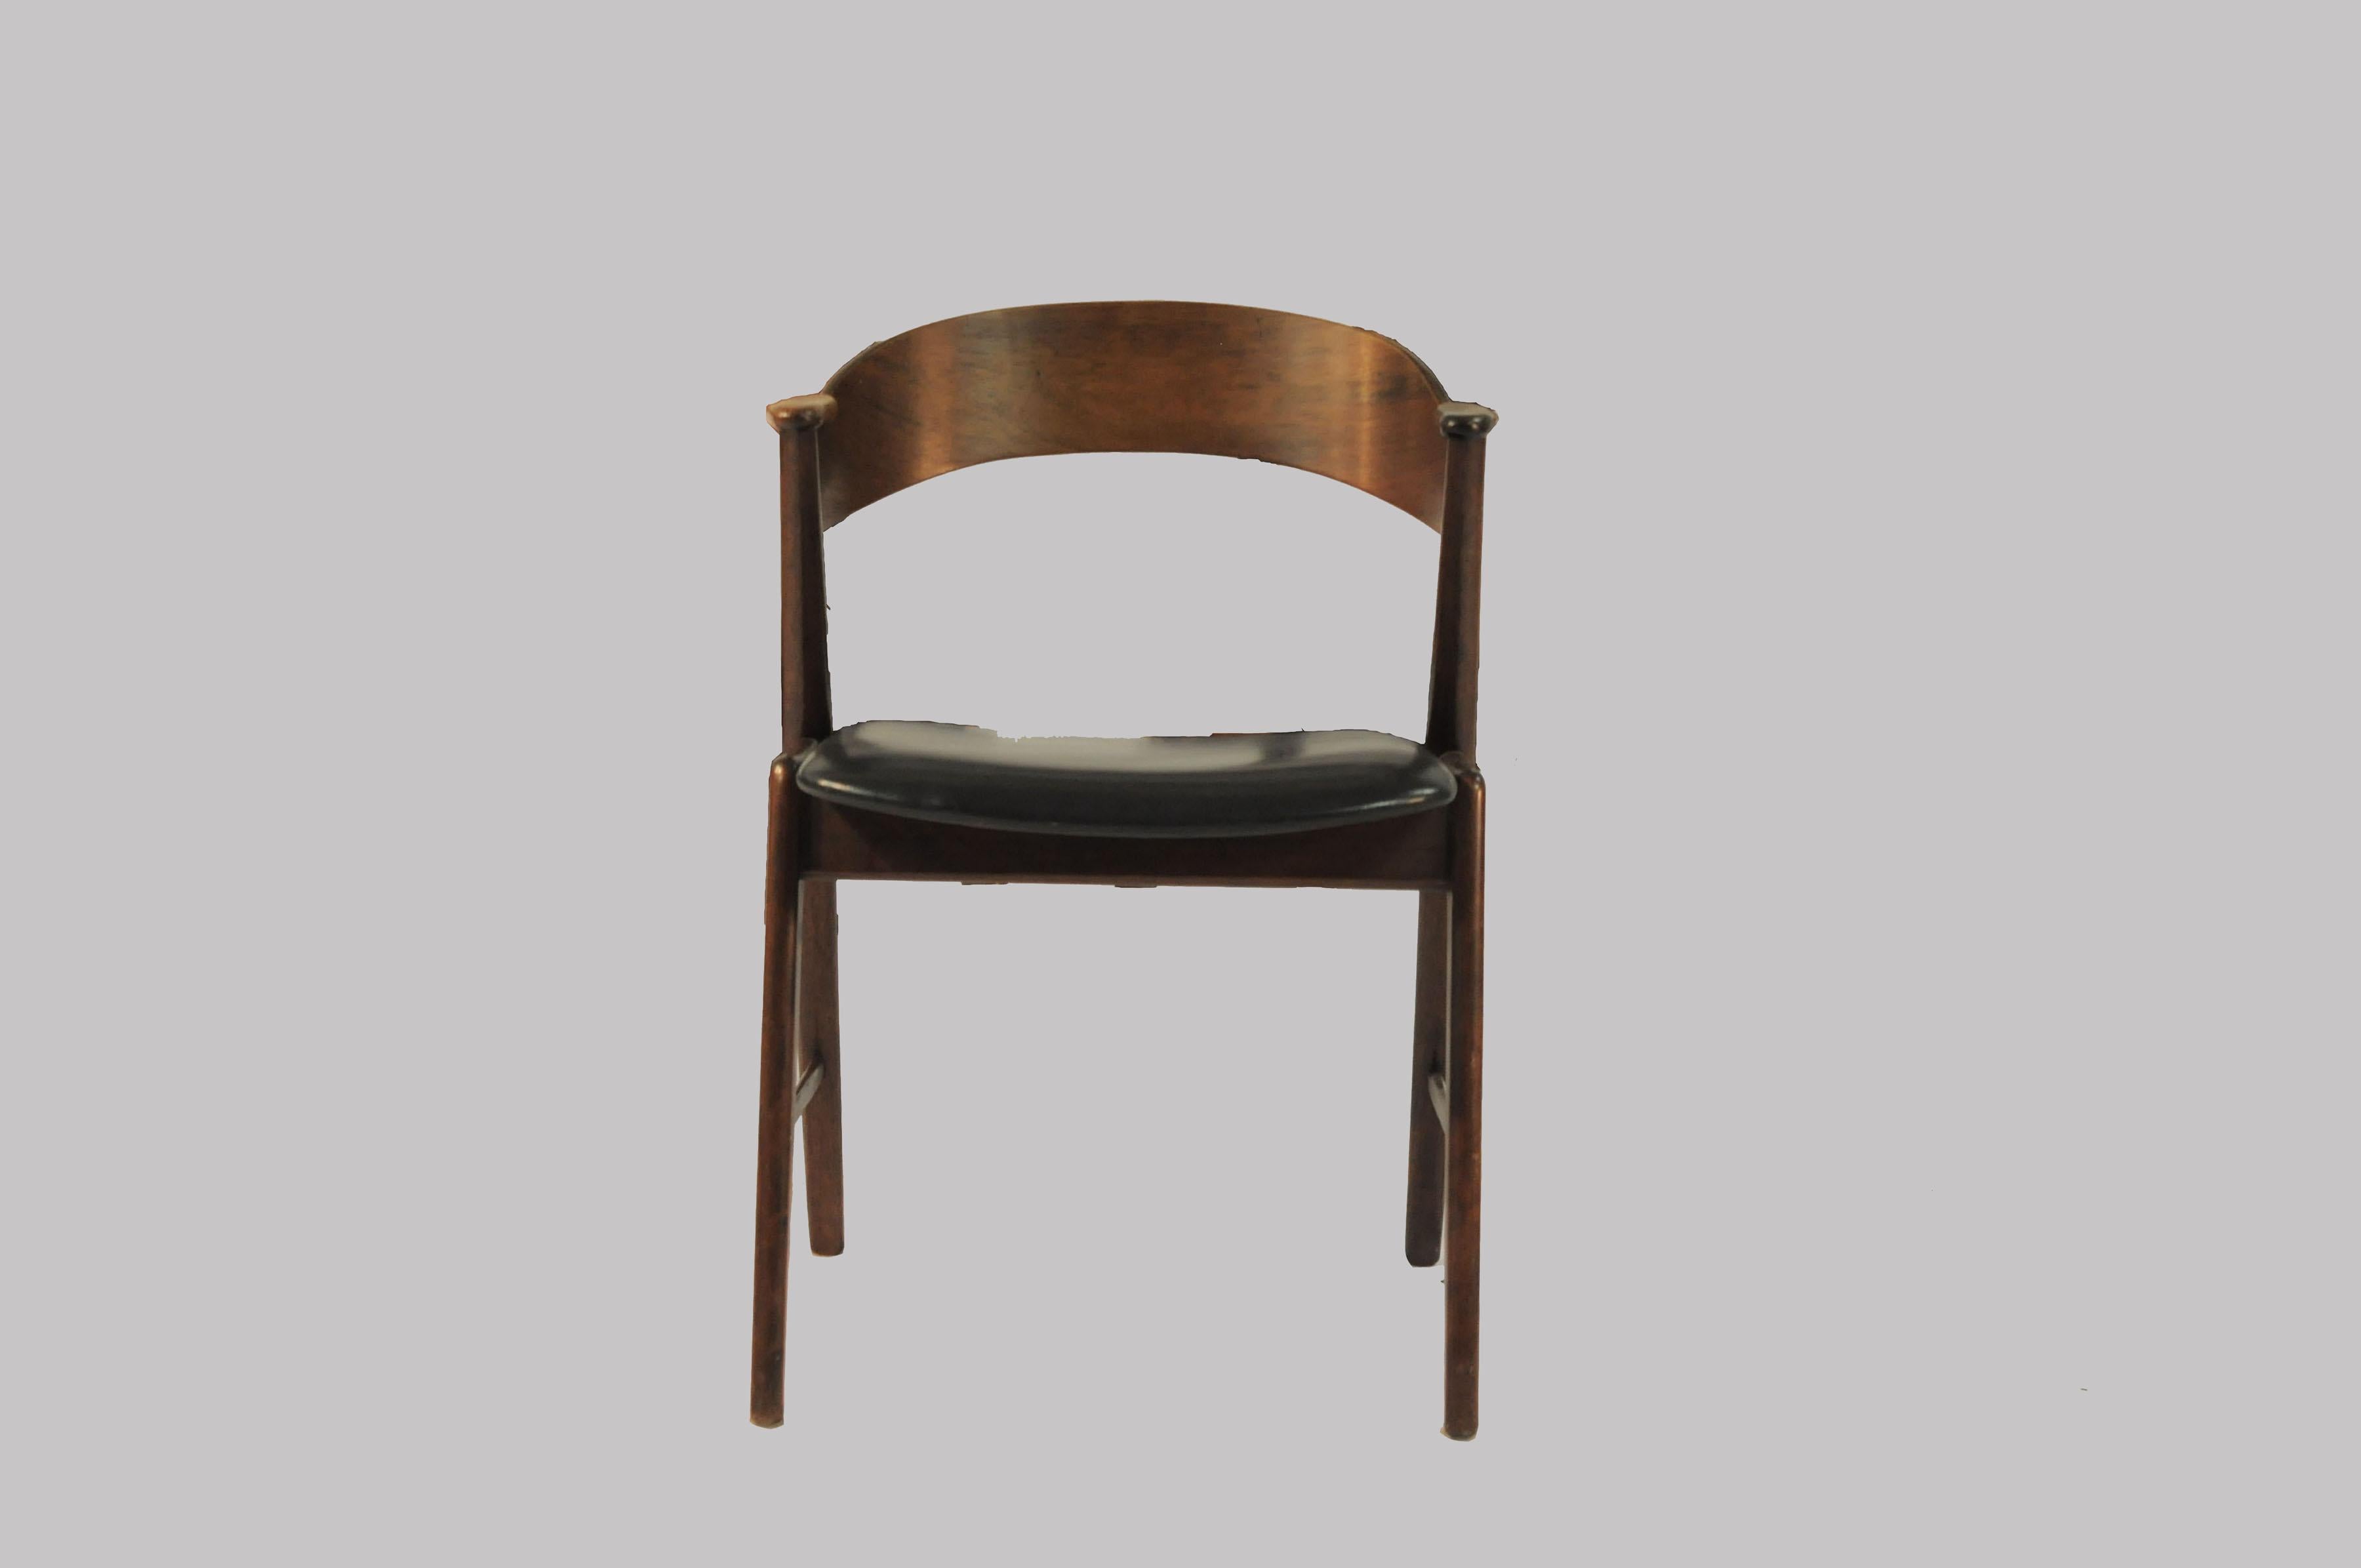 1960's Six fully restored danish rosewood dining chairs custom upholstery.

Set of four Danish dining chairs known as model 32 manufactored by Korup Stolefabrik in the 1960s. The chairs feature curved rosewood backrests sliding into rosewood